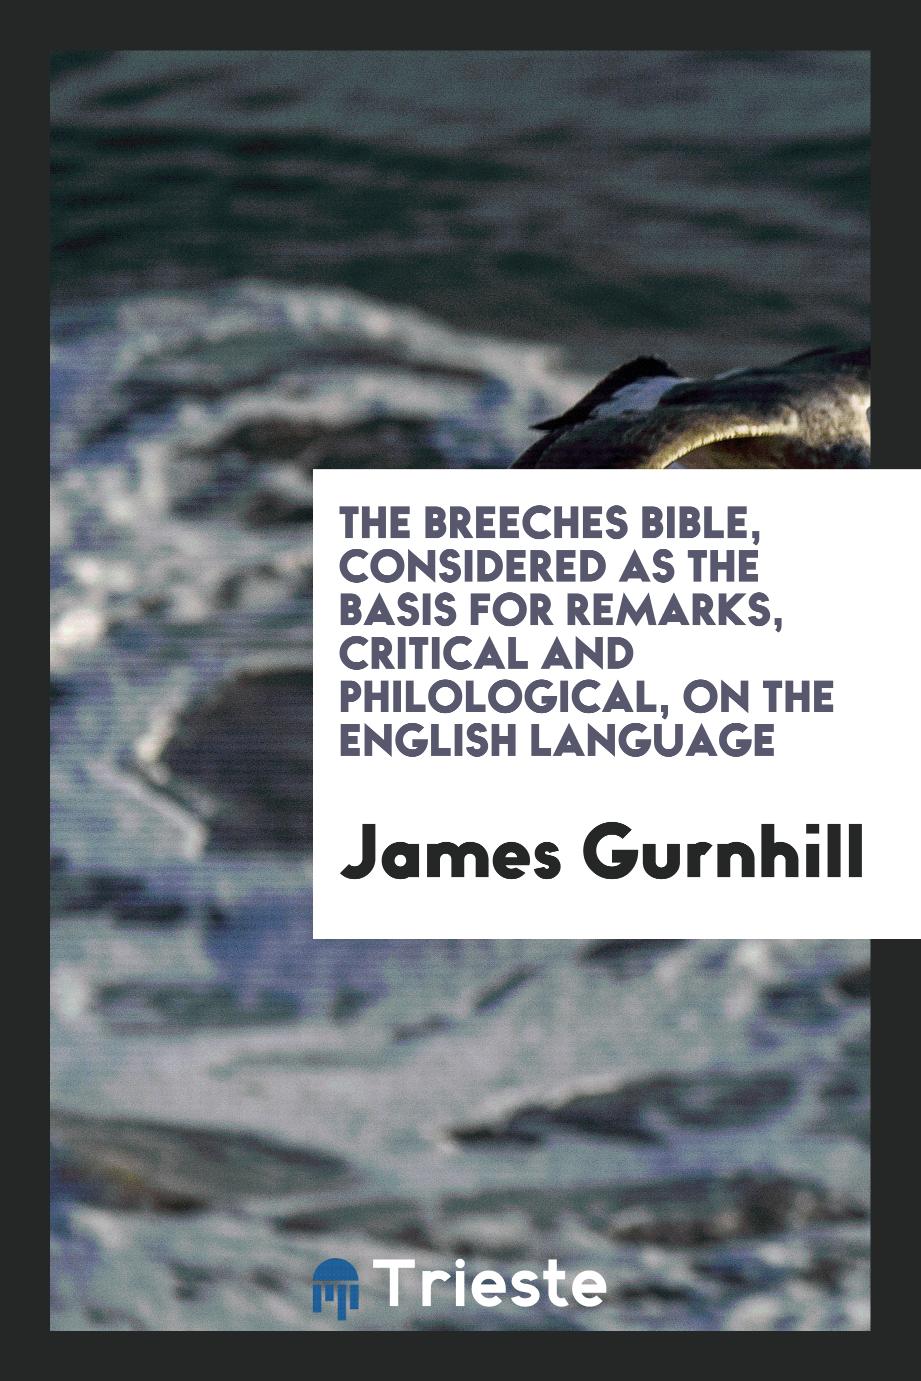 The Breeches Bible, considered as the basis for remarks, critical and philological, on the English language